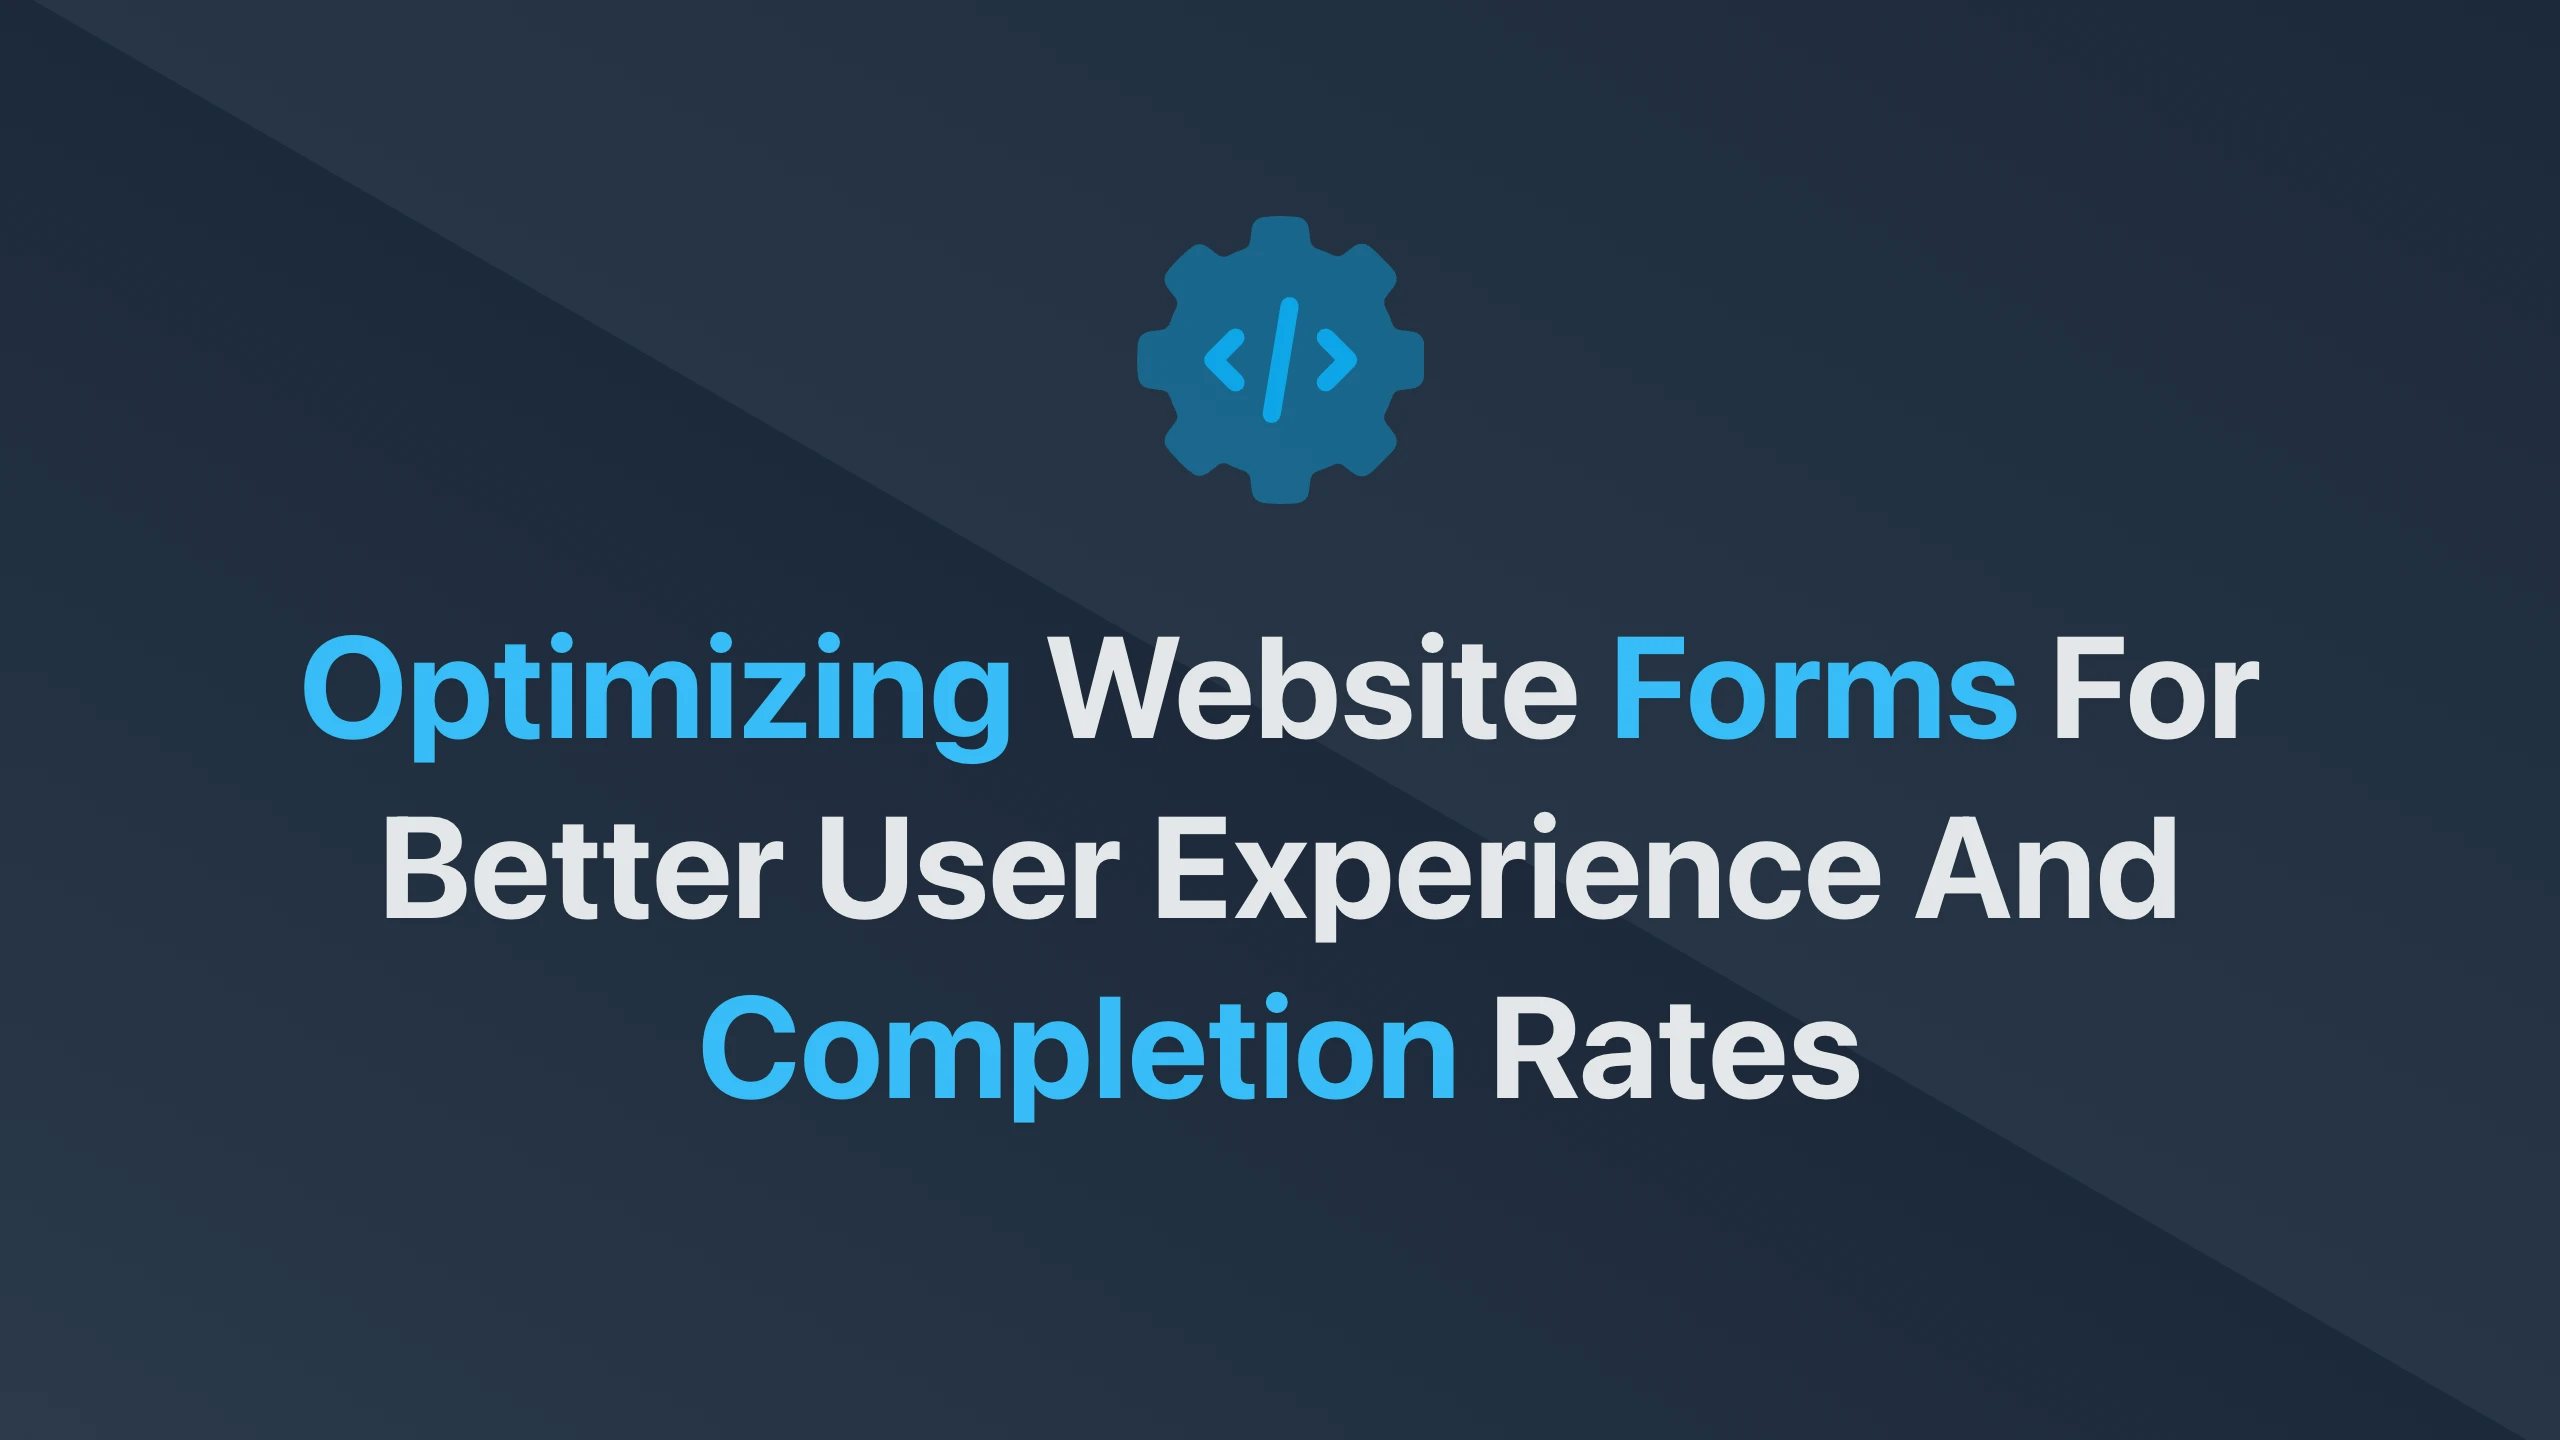 Cover Image for Optimizing Website Forms for Better User Experience and Completion Rates